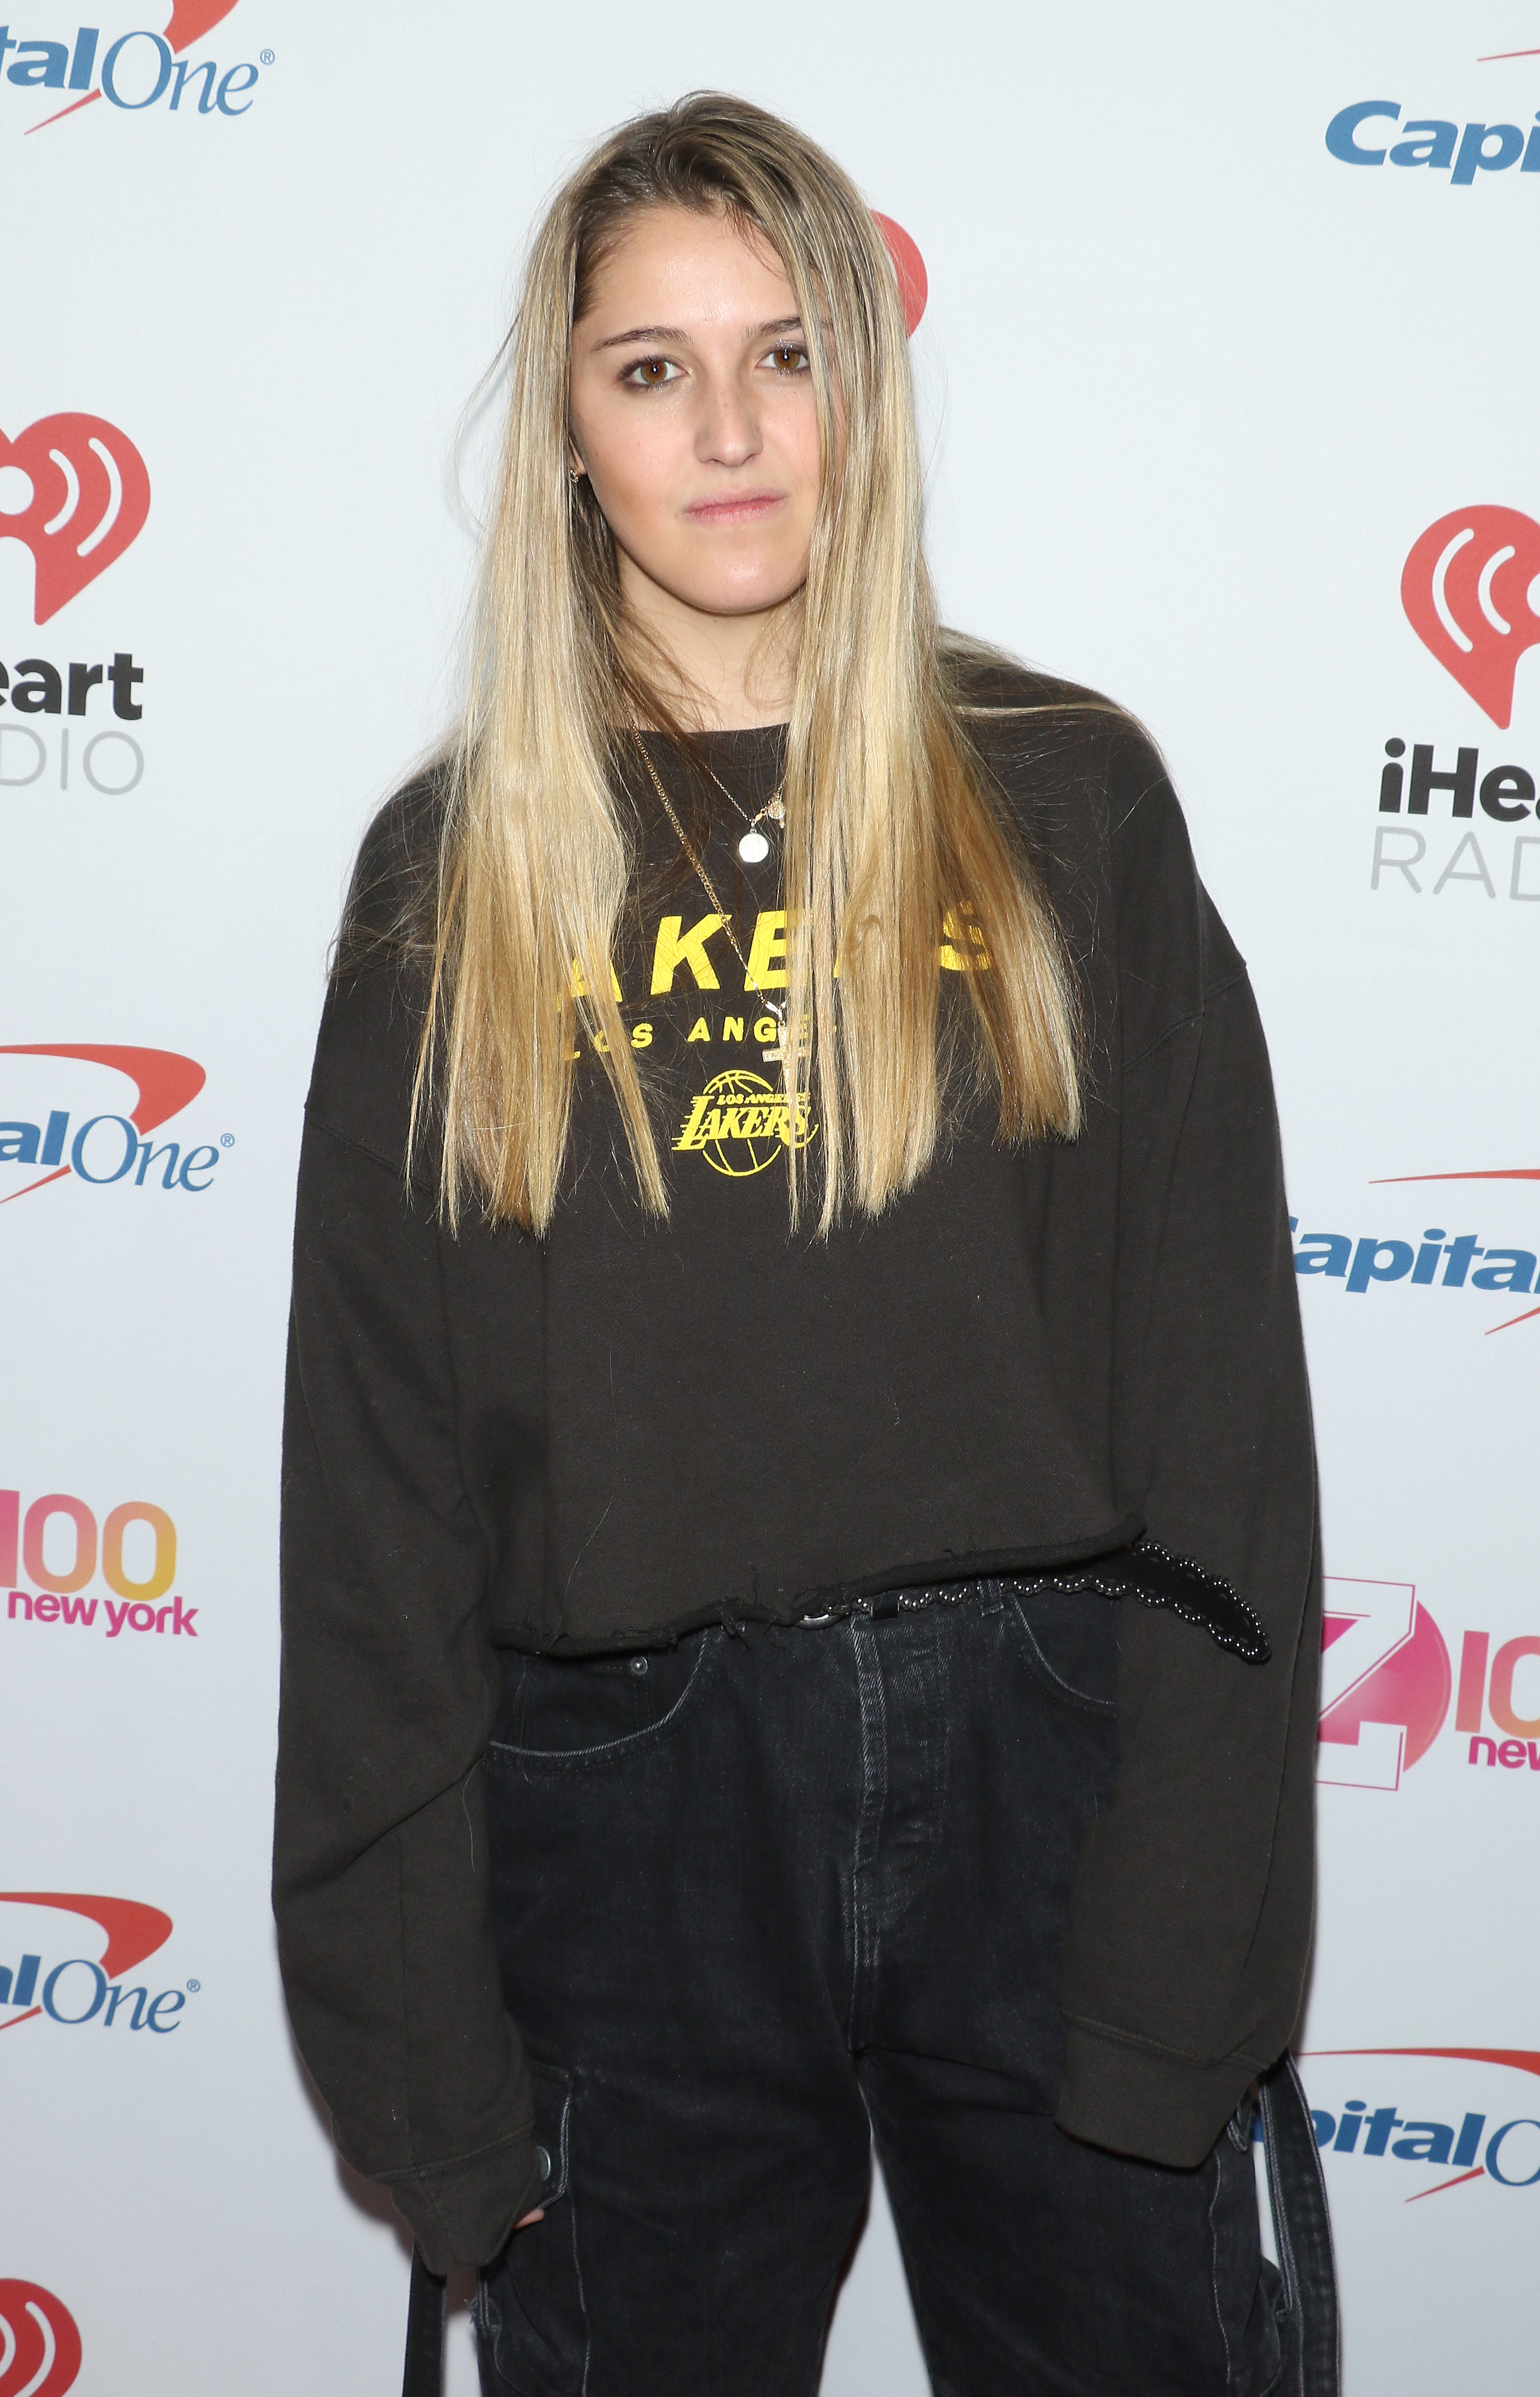 Chelsea Cutler at iHeartRadio's Z100 Jingle Ball 2019 on December 13, 2019, in New York City. | Source: Getty Images